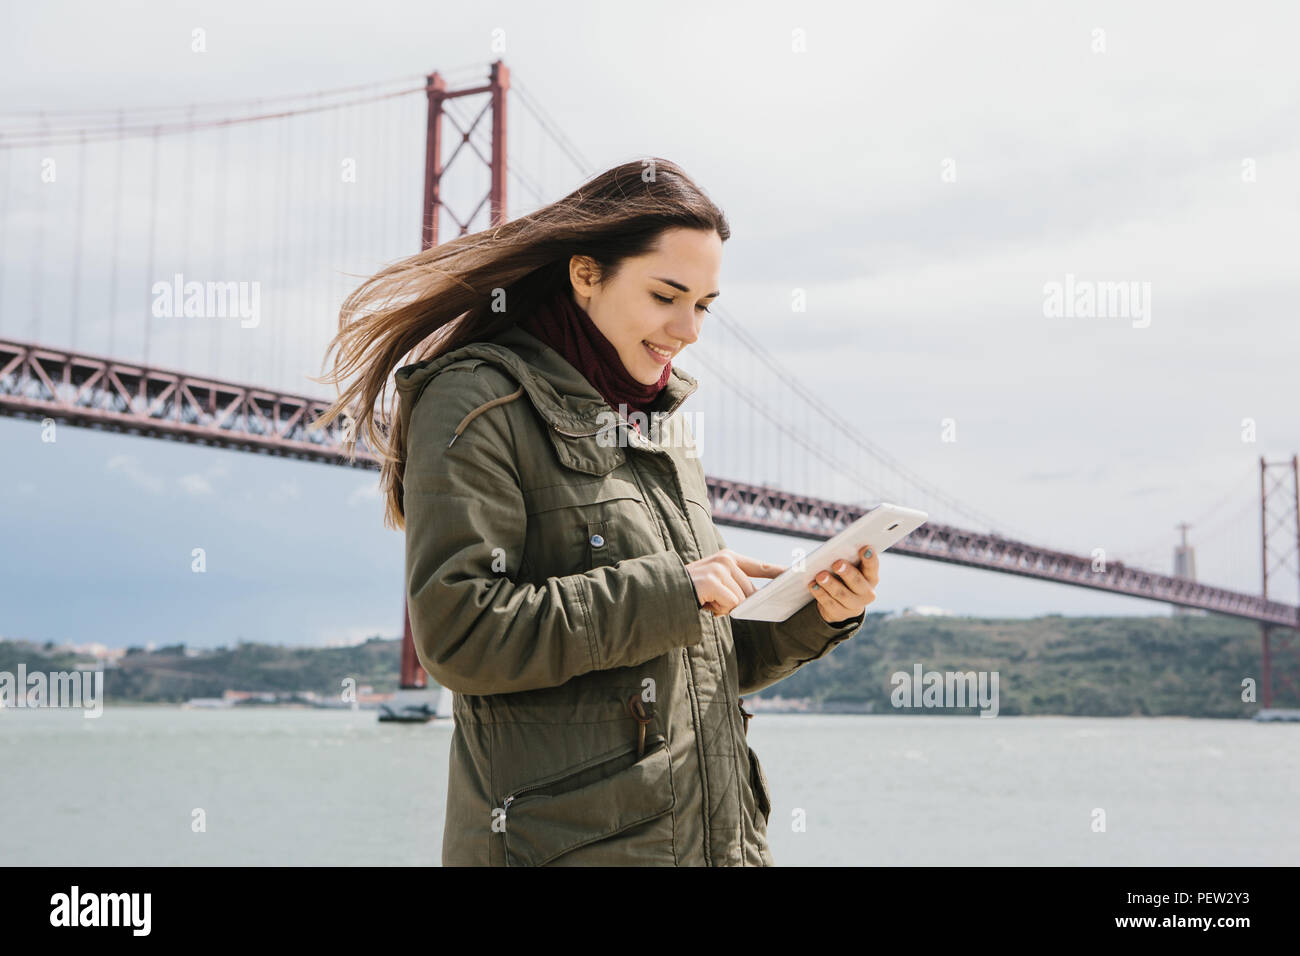 A young beautiful woman uses a tablet to communicate with friends or looks at a map or calls a taxi or something else. Bridge April 25 in Lisbon in Portugal in the background. Stock Photo